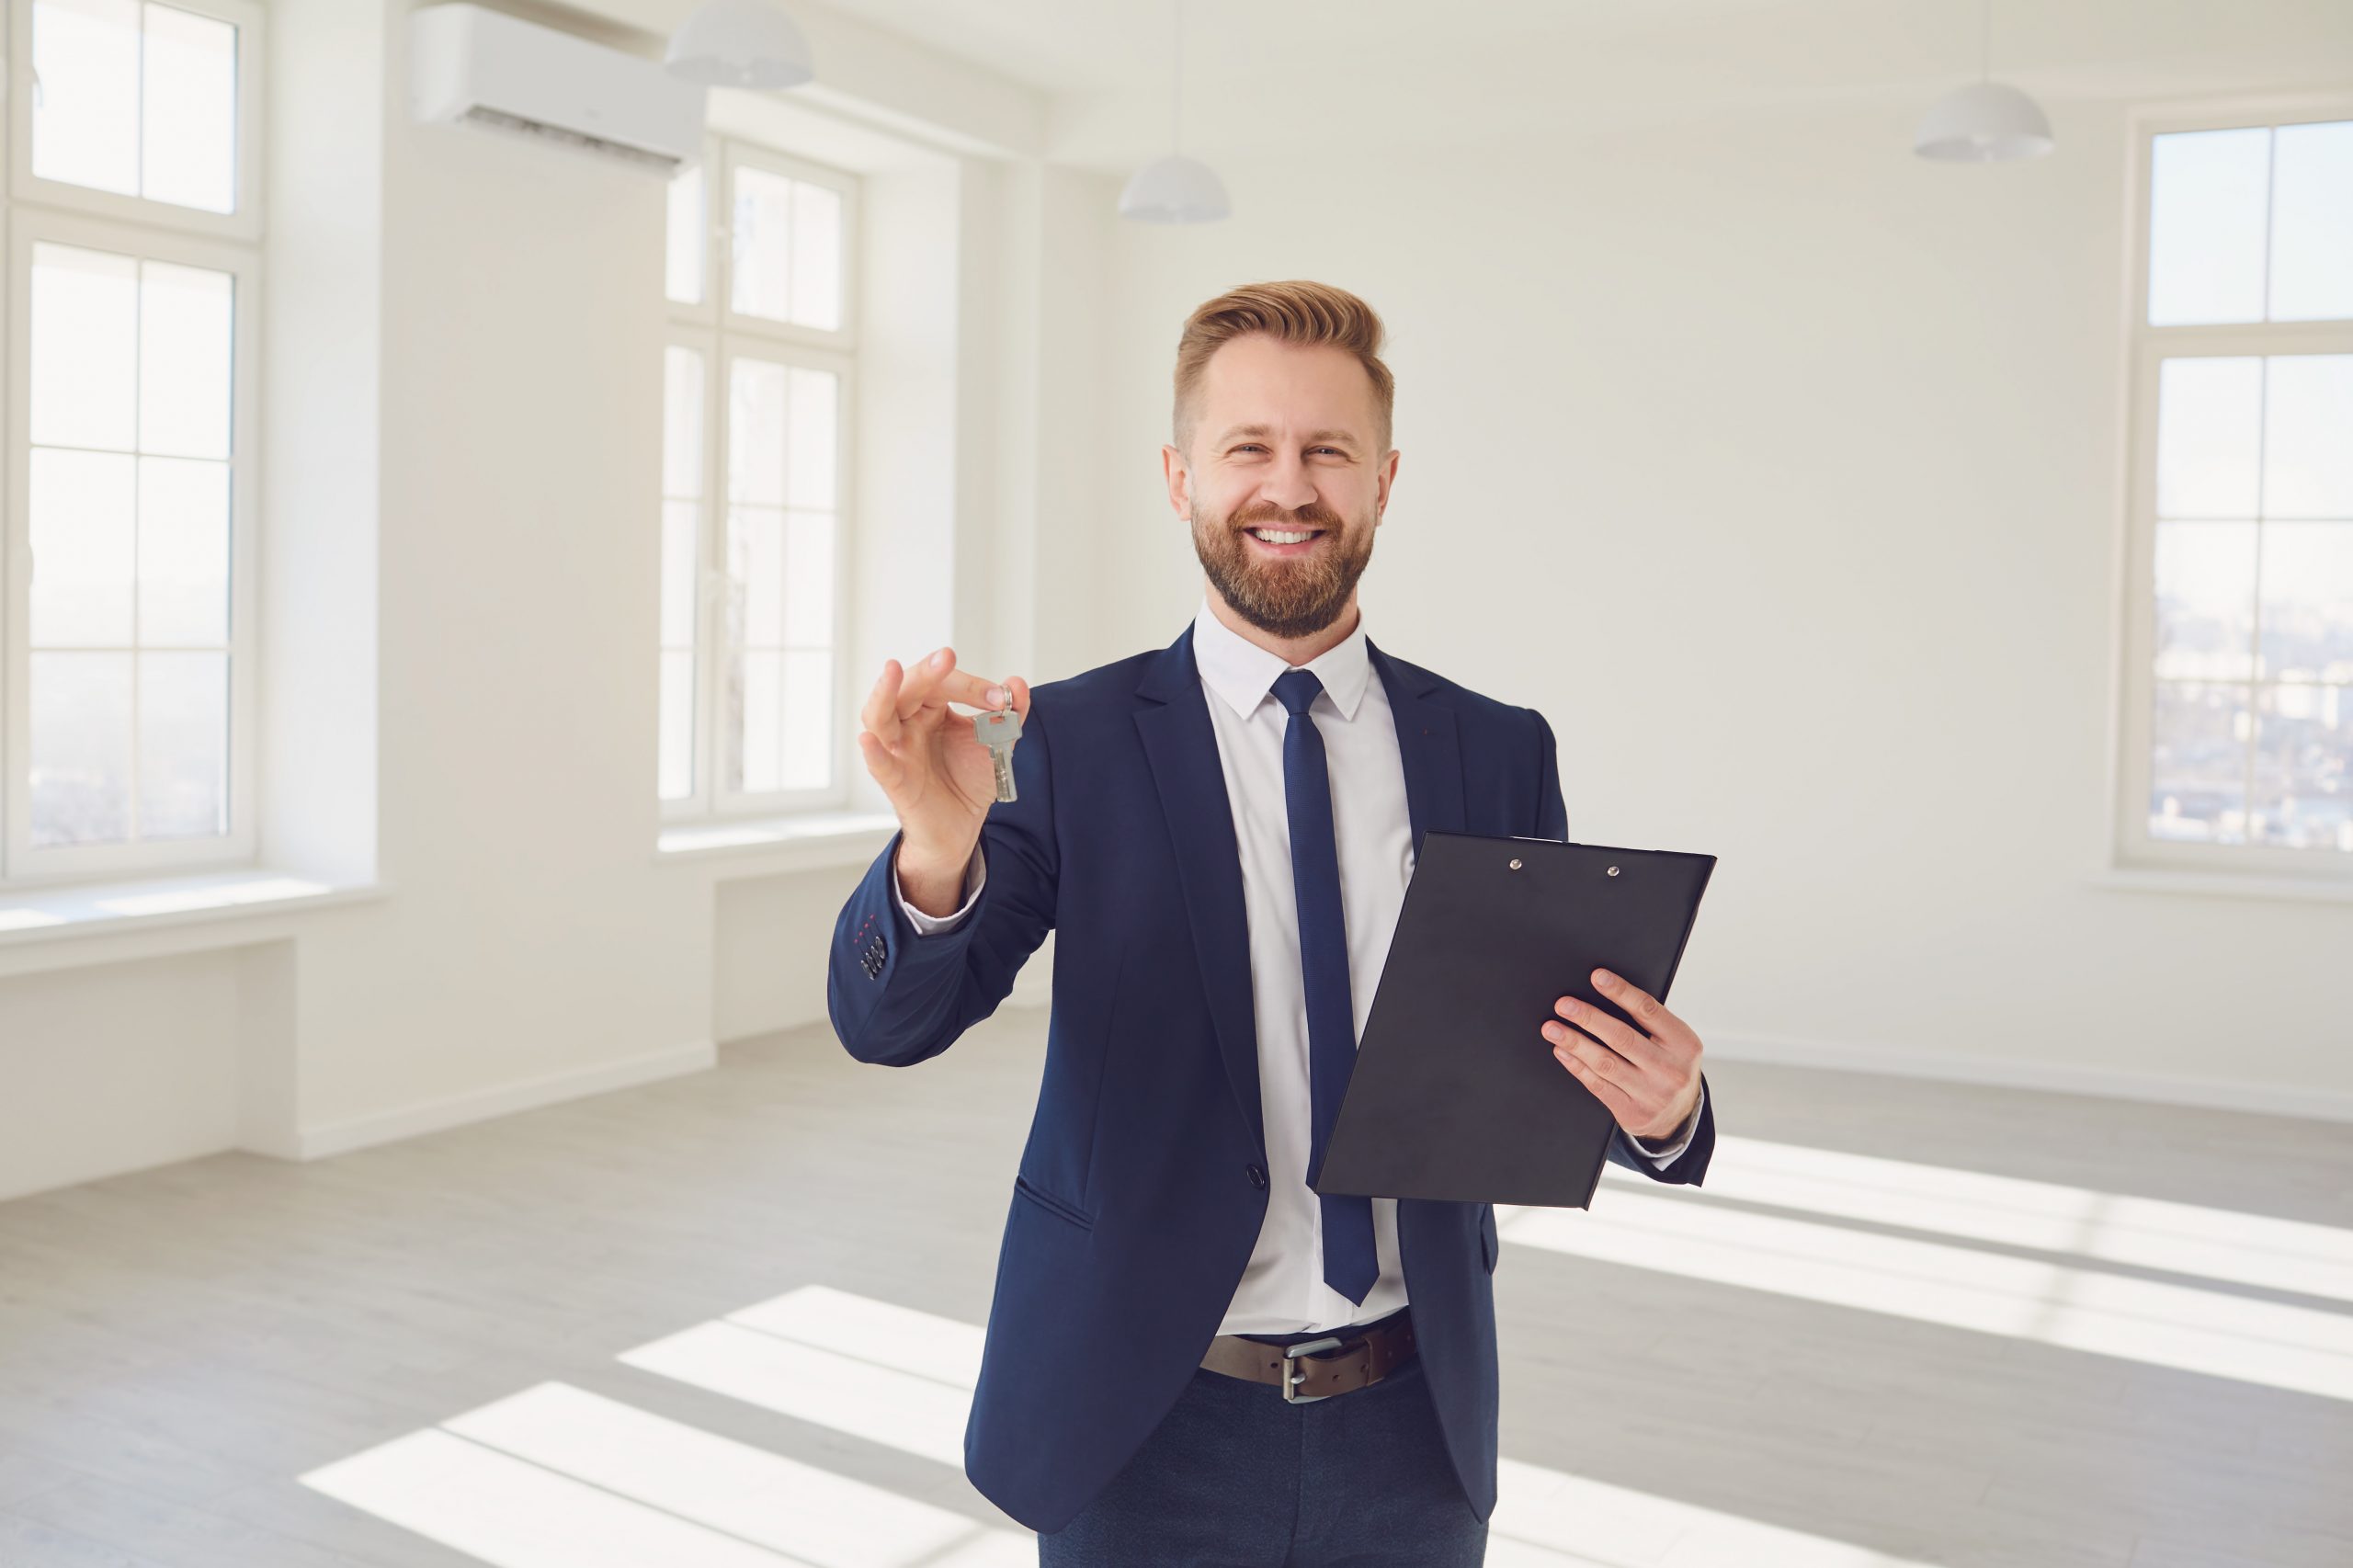 Successful salesman in trendy suit holding clipboard and key smiling at camera in fresh new apartment